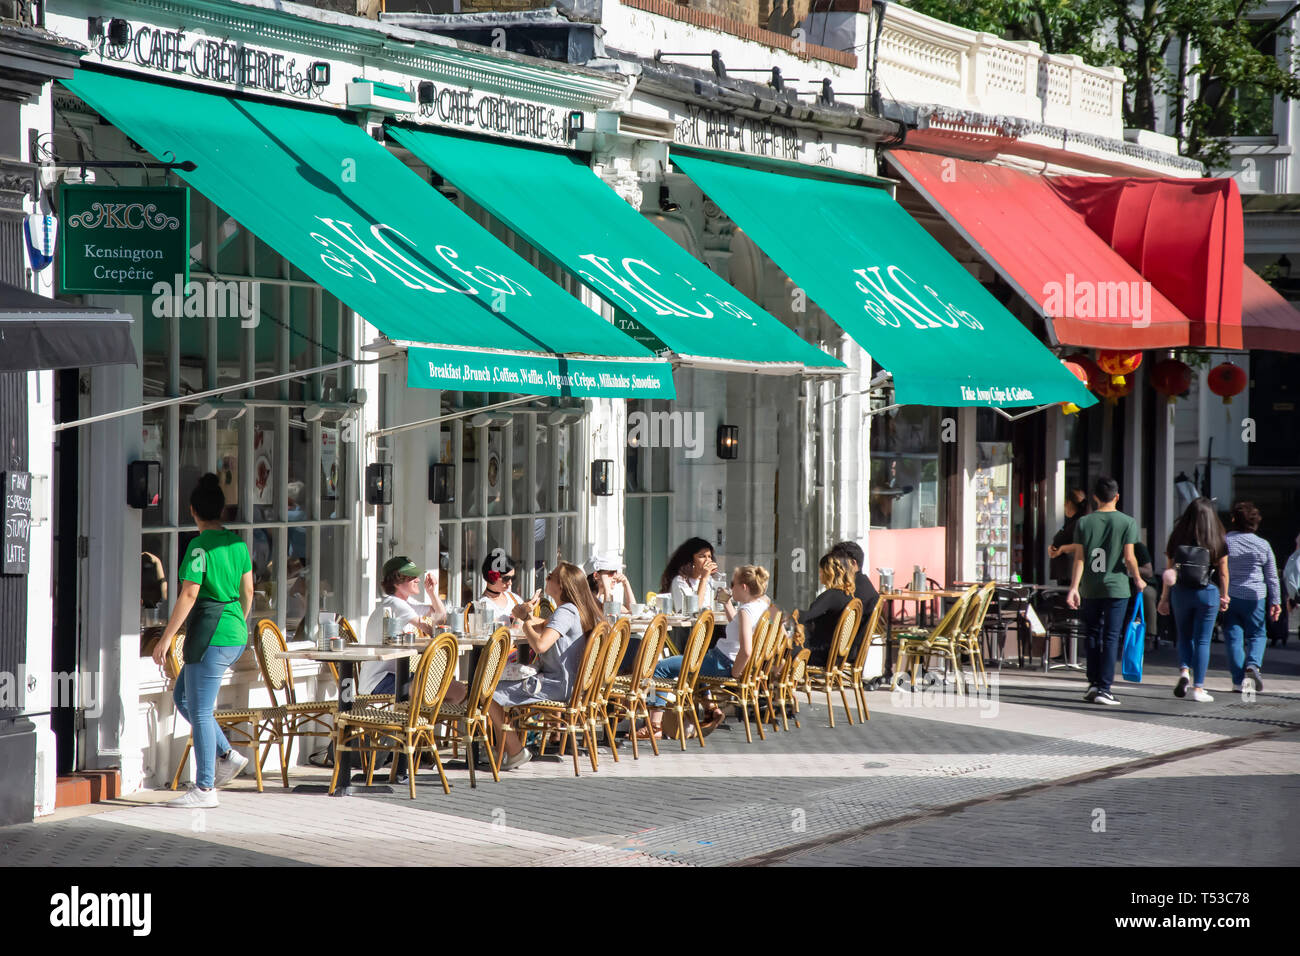 Outdoor dining, Kensington Creperie, Exhibition Rd, South Kensington, Royal Borough of Kensington and Chelsea, Greater London, England, United Kingdom Stock Photo